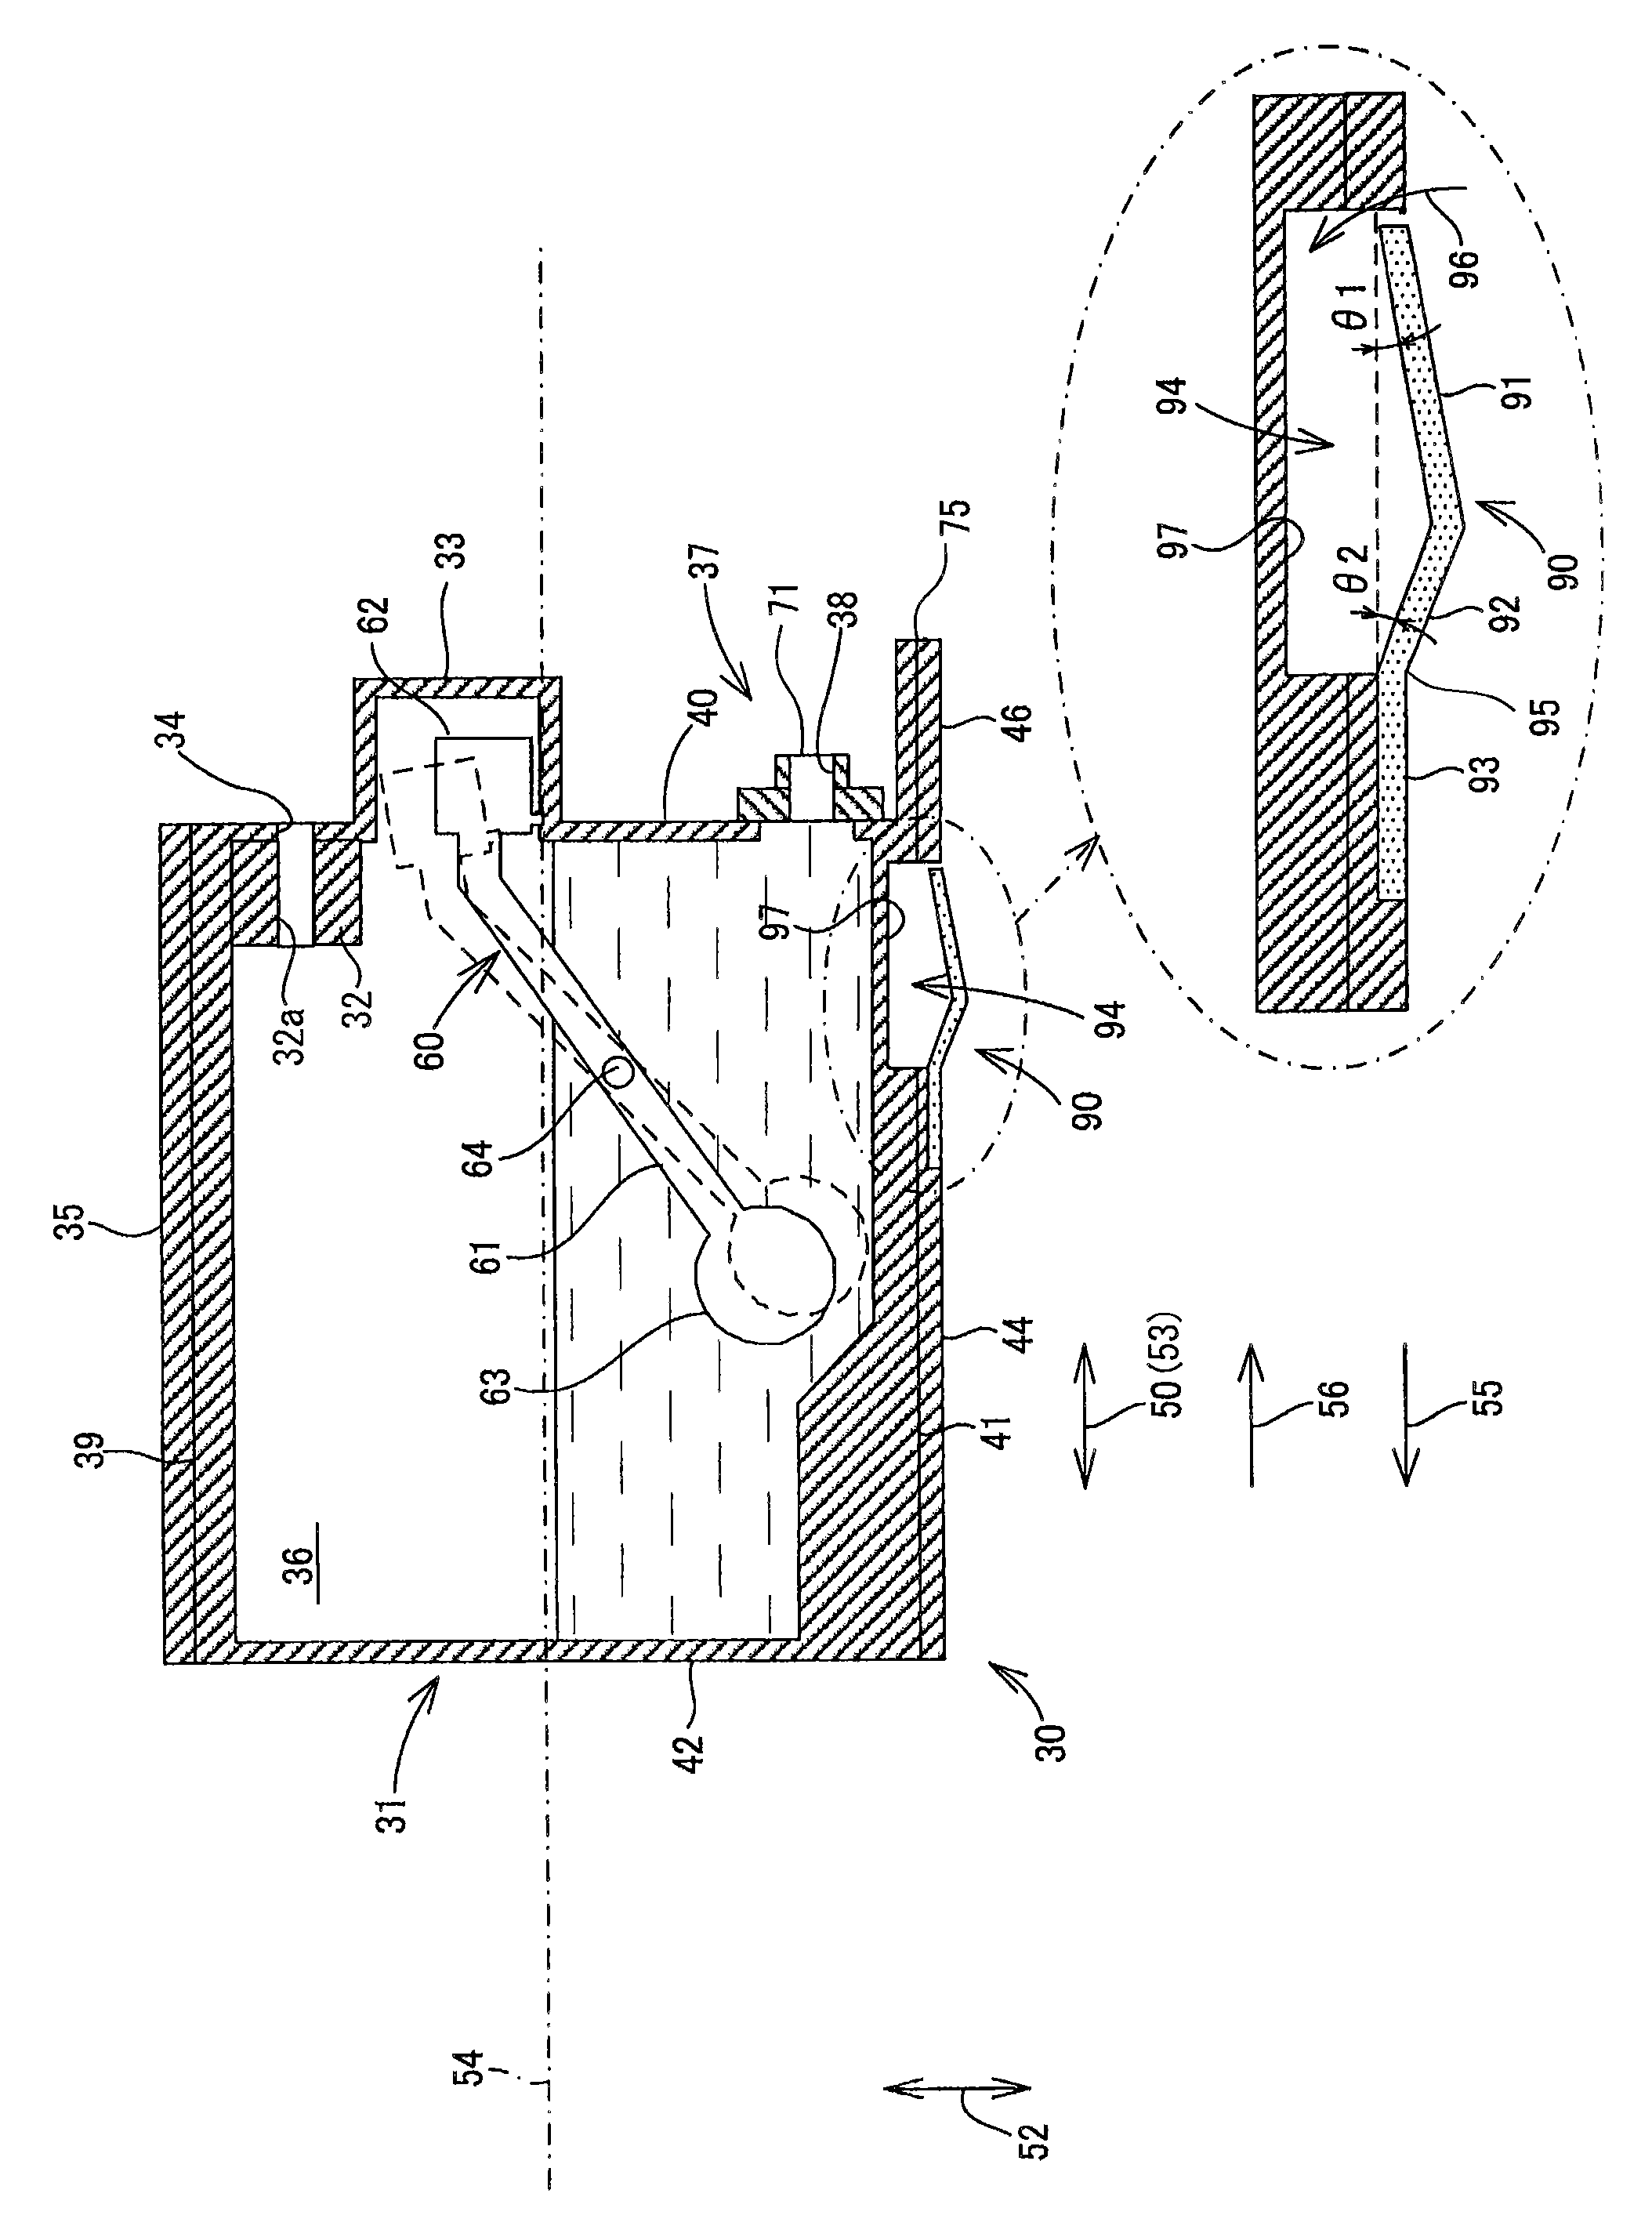 Ink cartridge and recording device